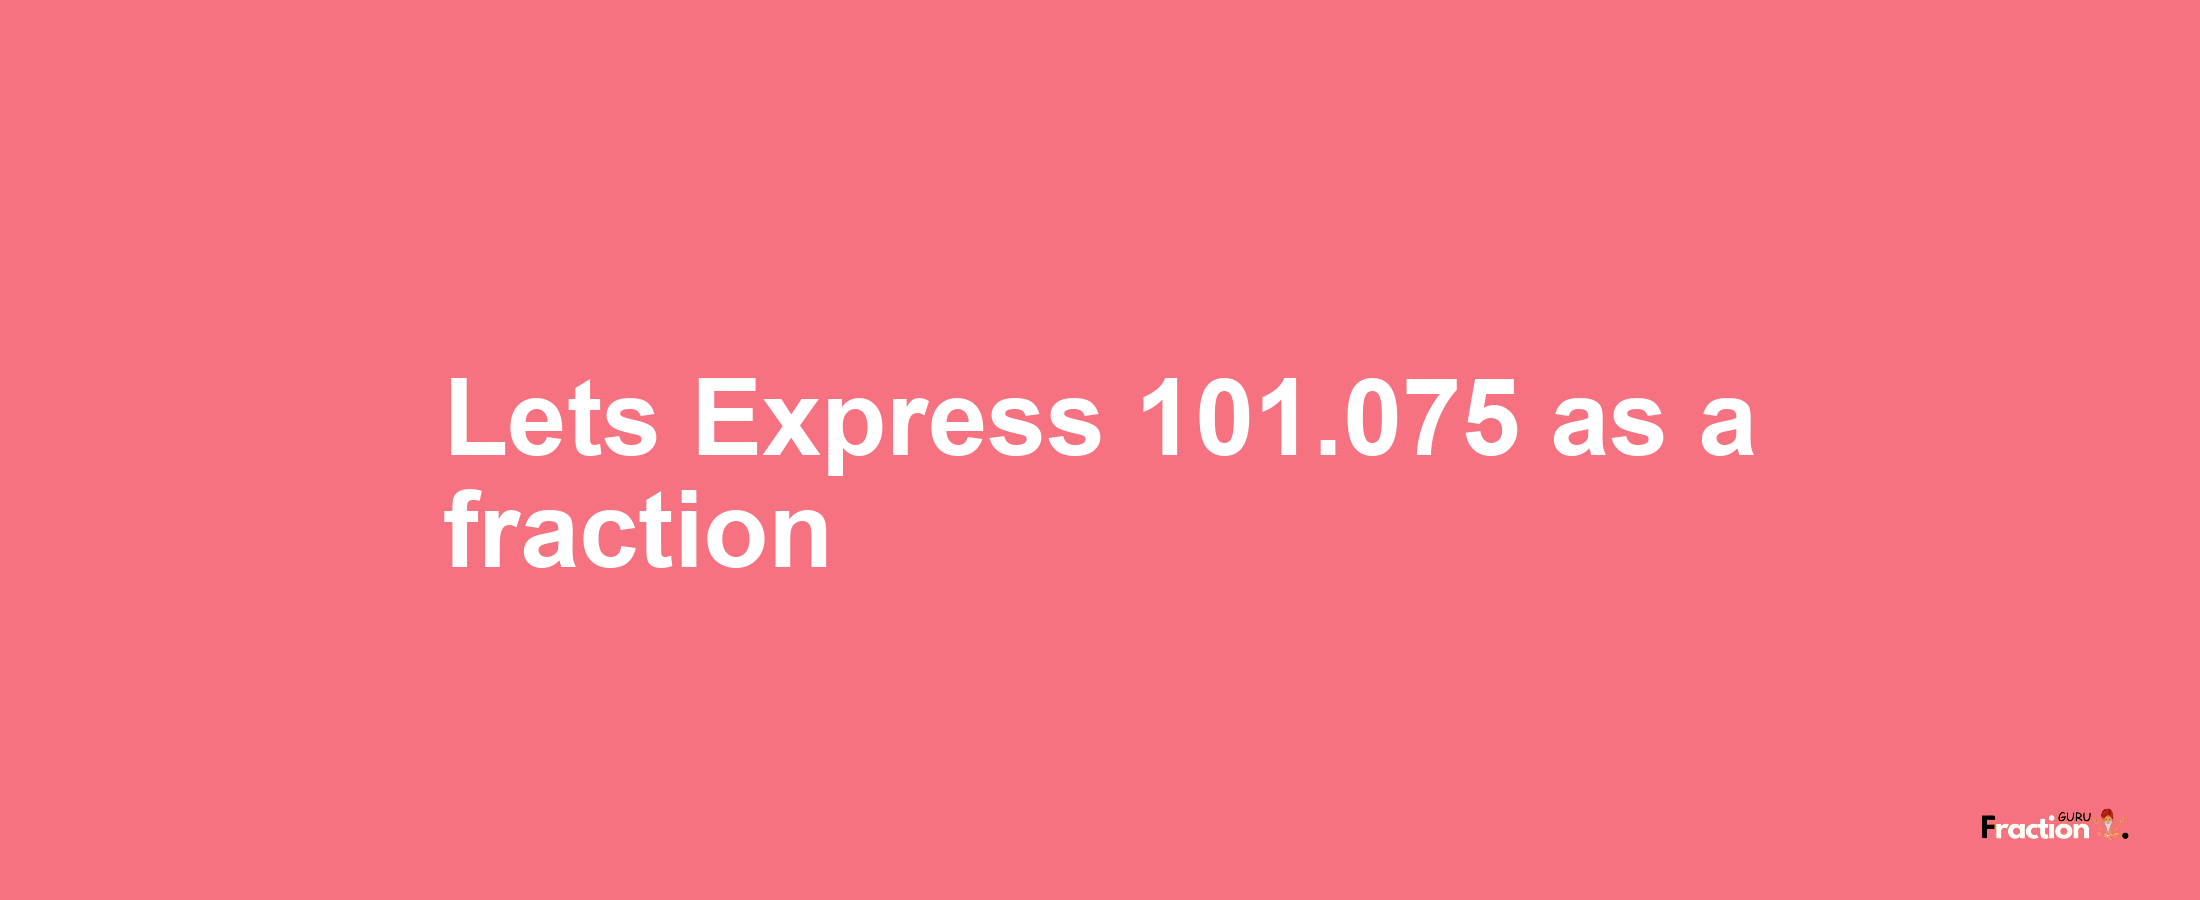 Lets Express 101.075 as afraction